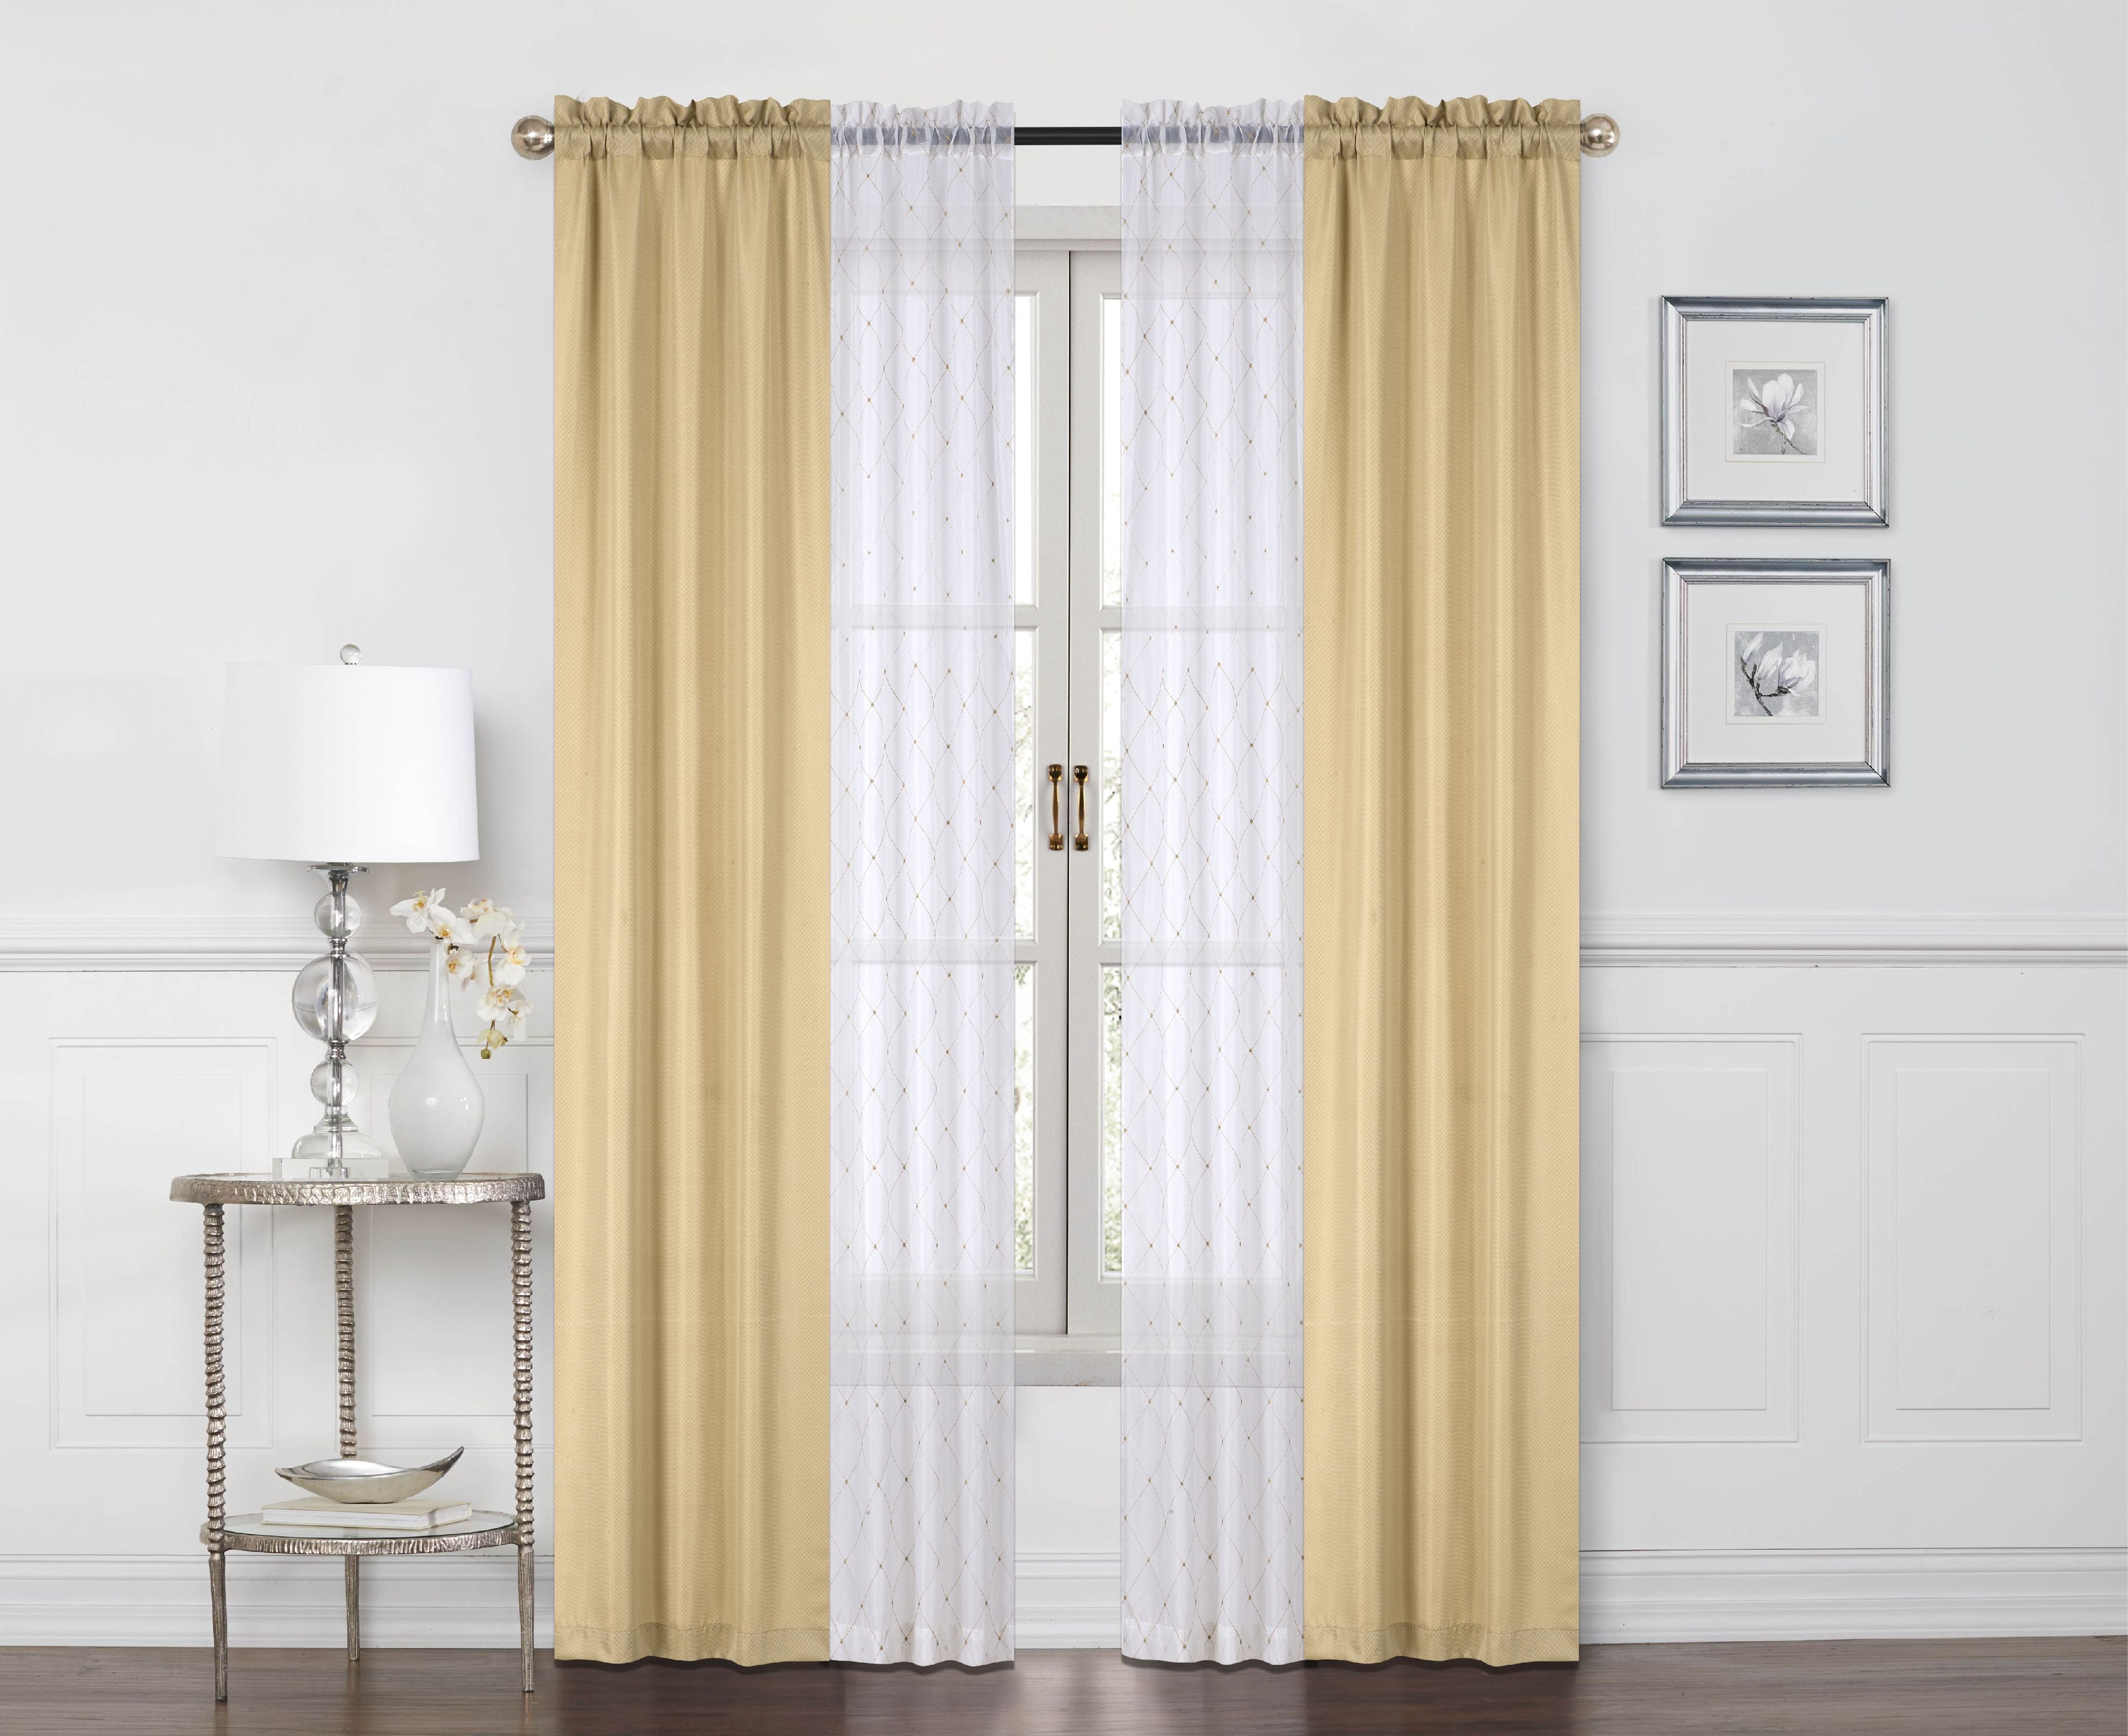 2 Curtains Style Sheer For Living Room